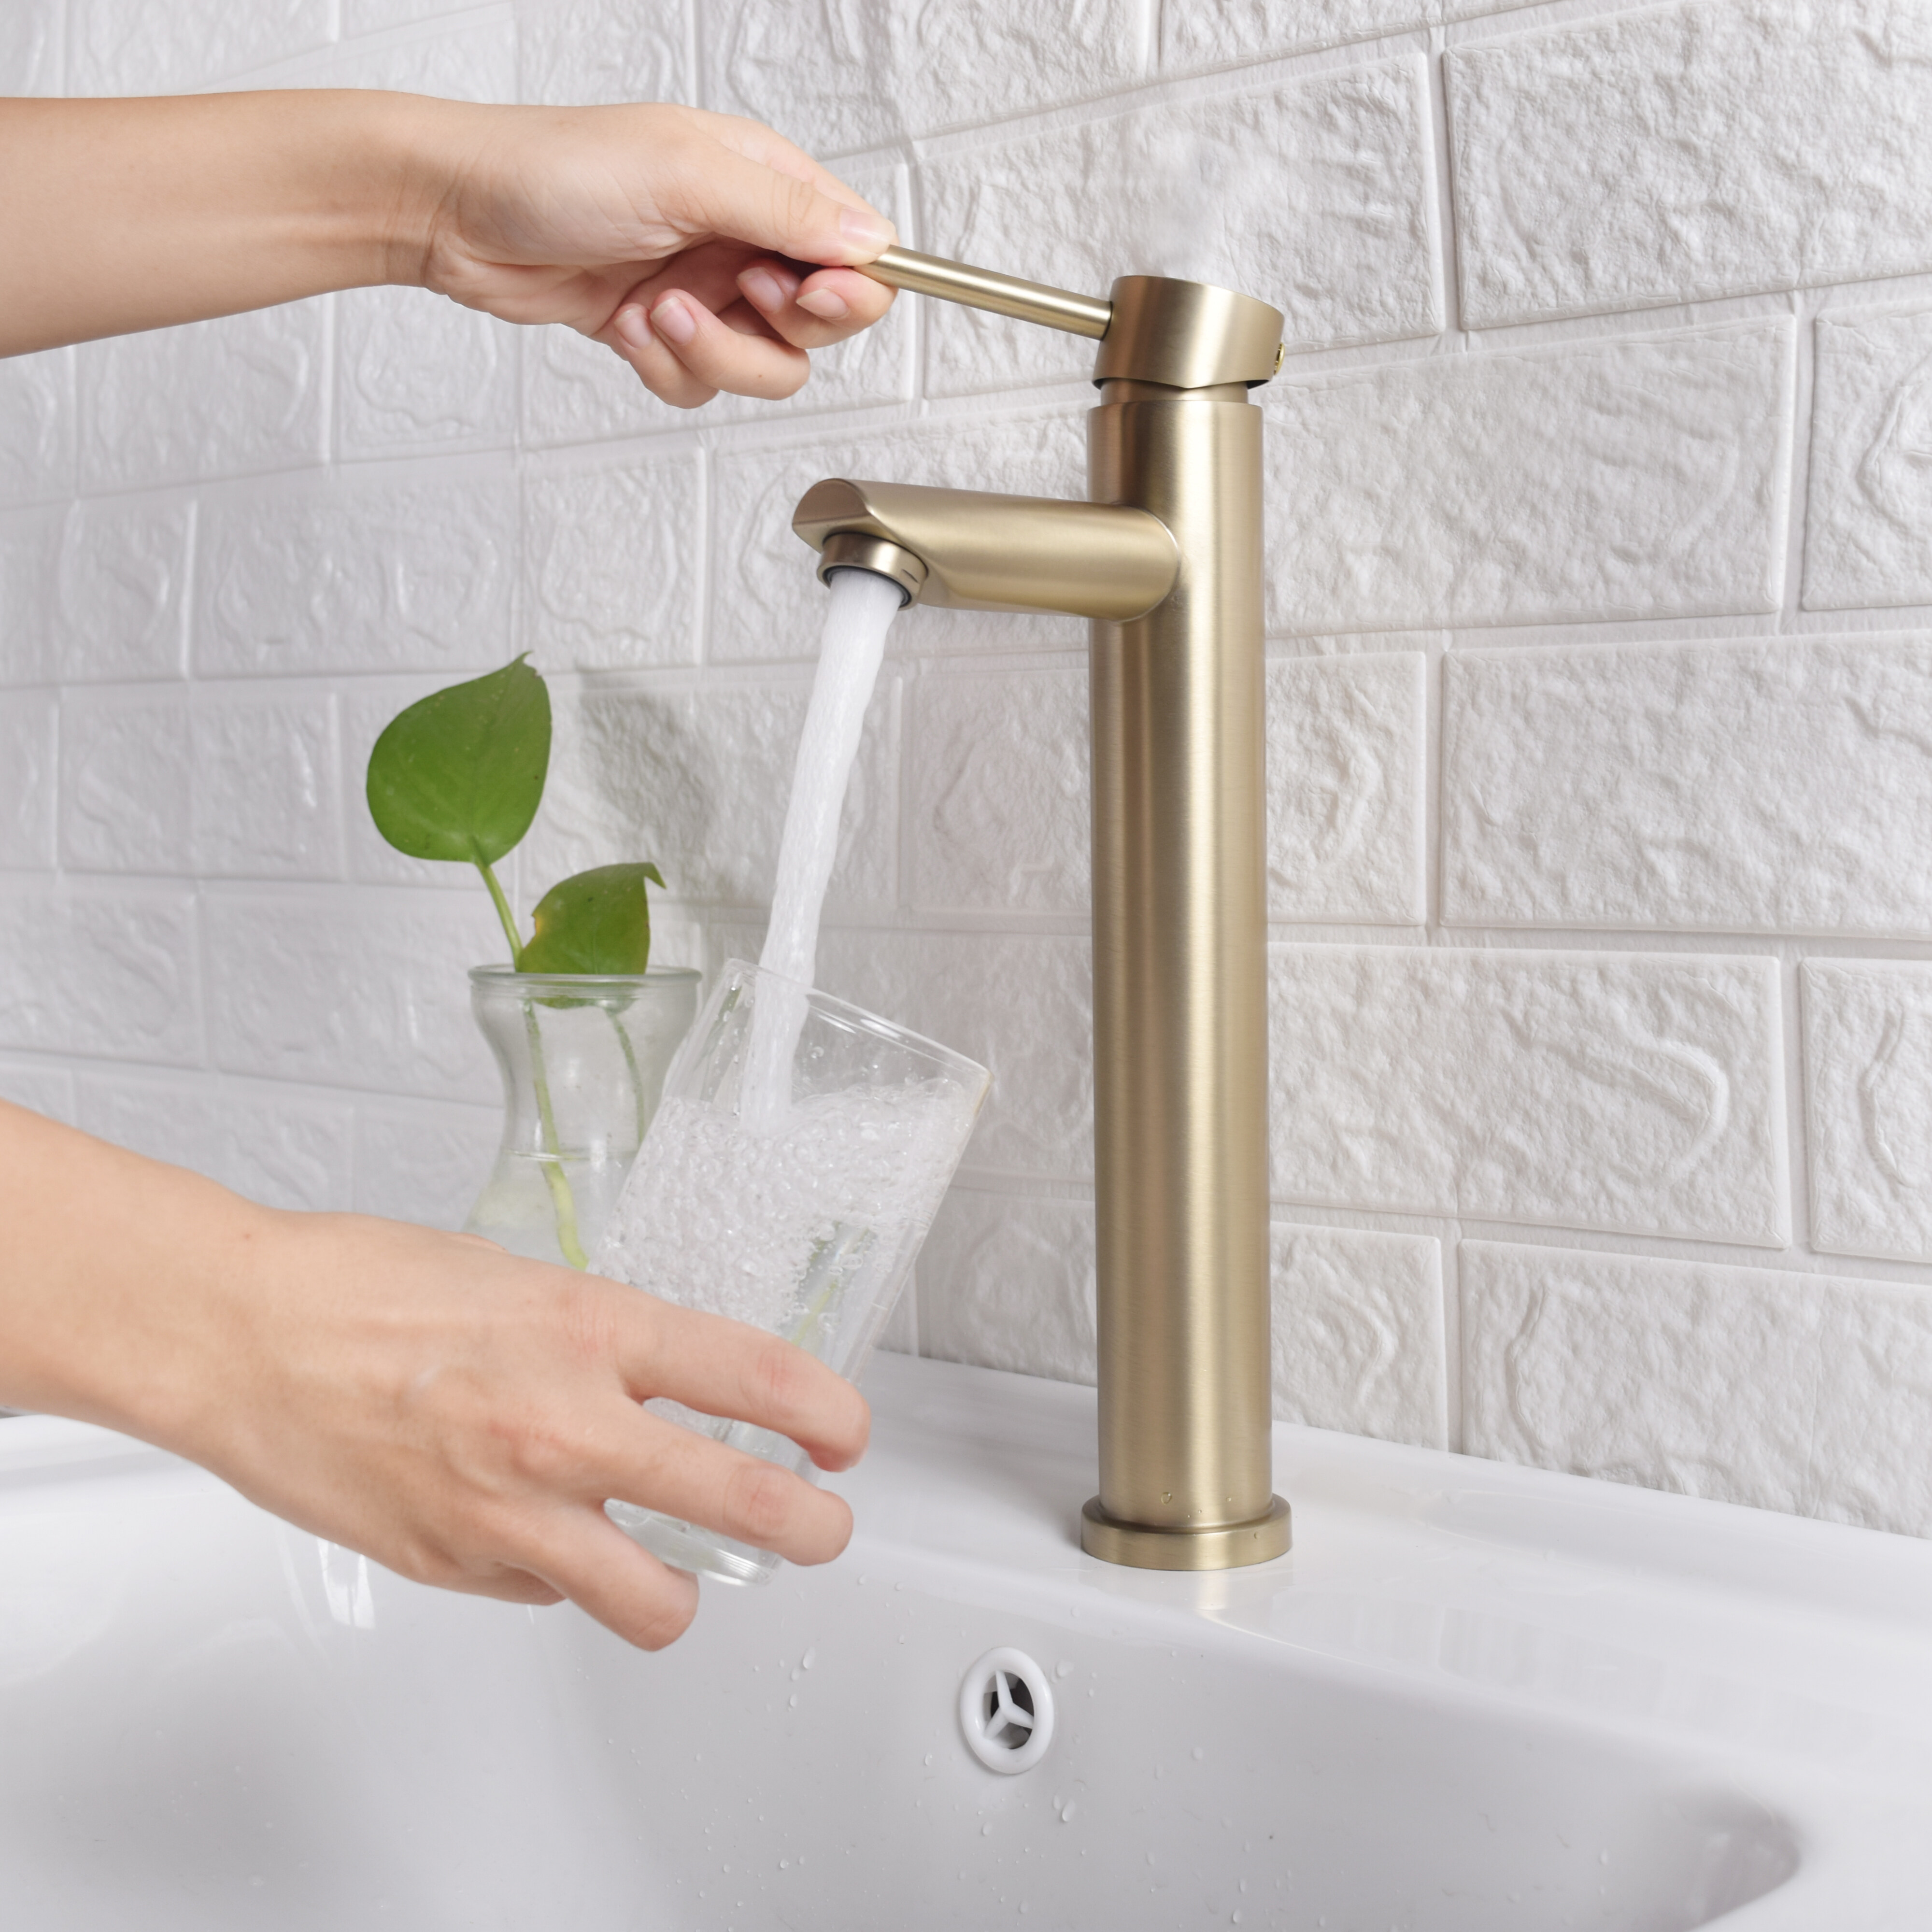 Upgrade Your Bathroom Experience with the Automatic 304 Bathroom Basin Mixer: Convenience and Style Combined